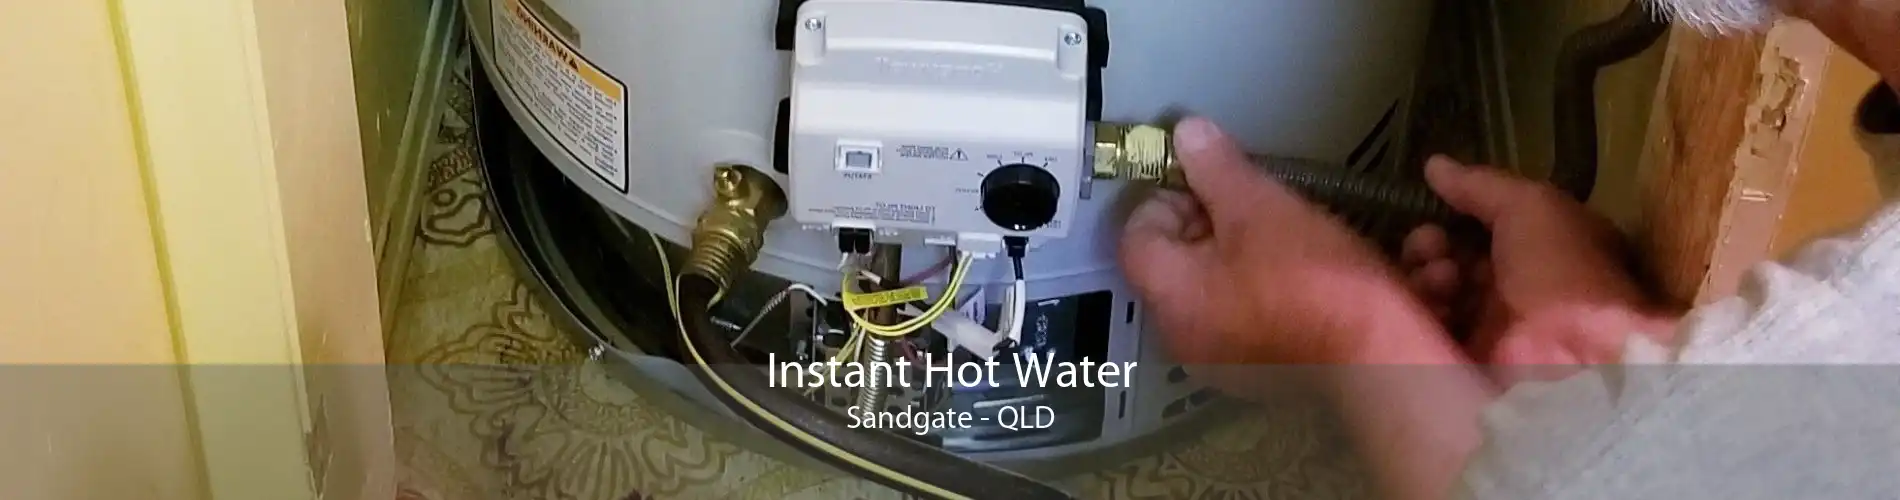 Instant Hot Water Sandgate - QLD